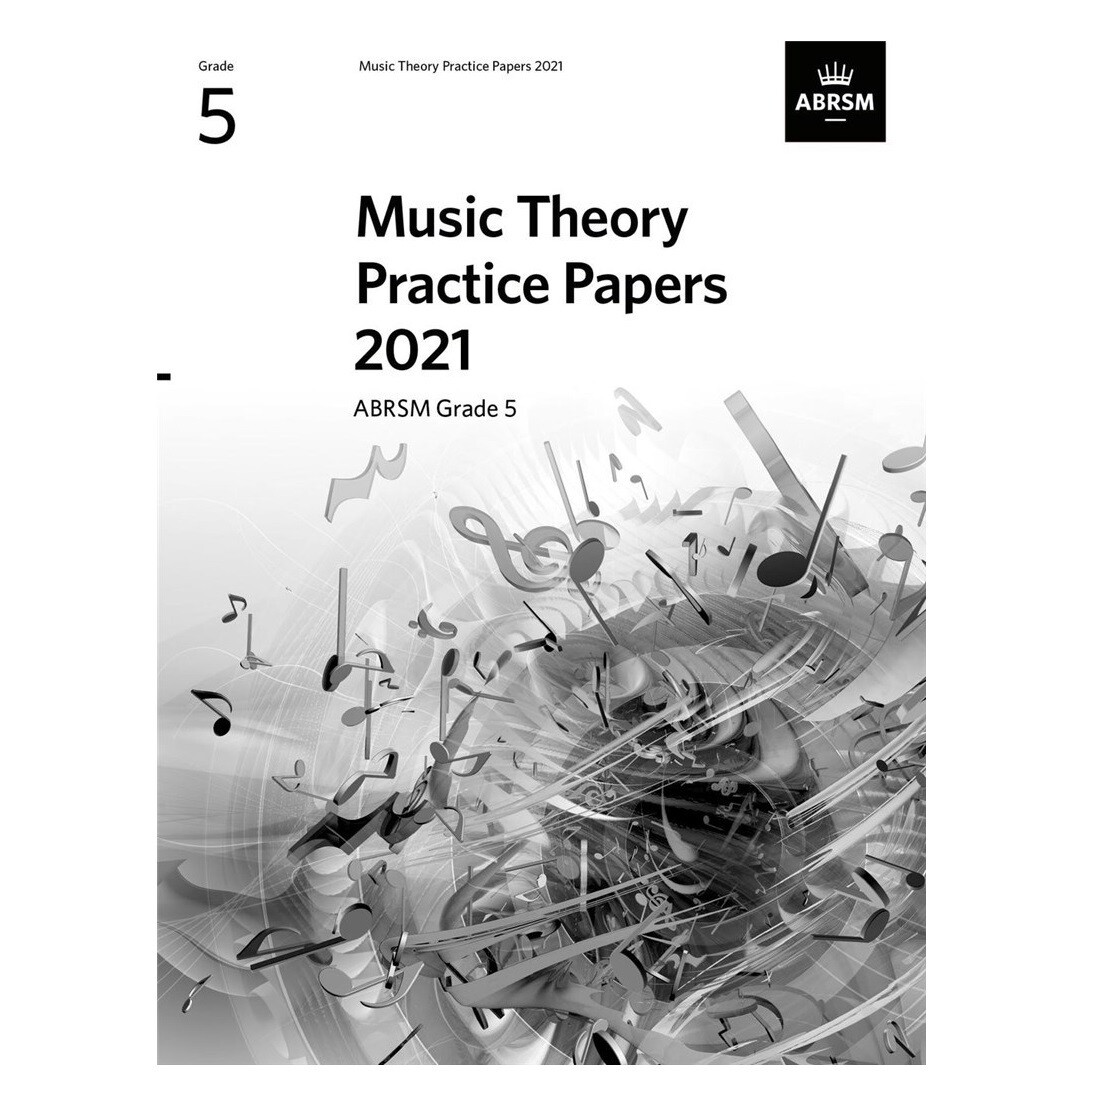 ABRSM Music Theory Practice Papers 2021: Grade 5